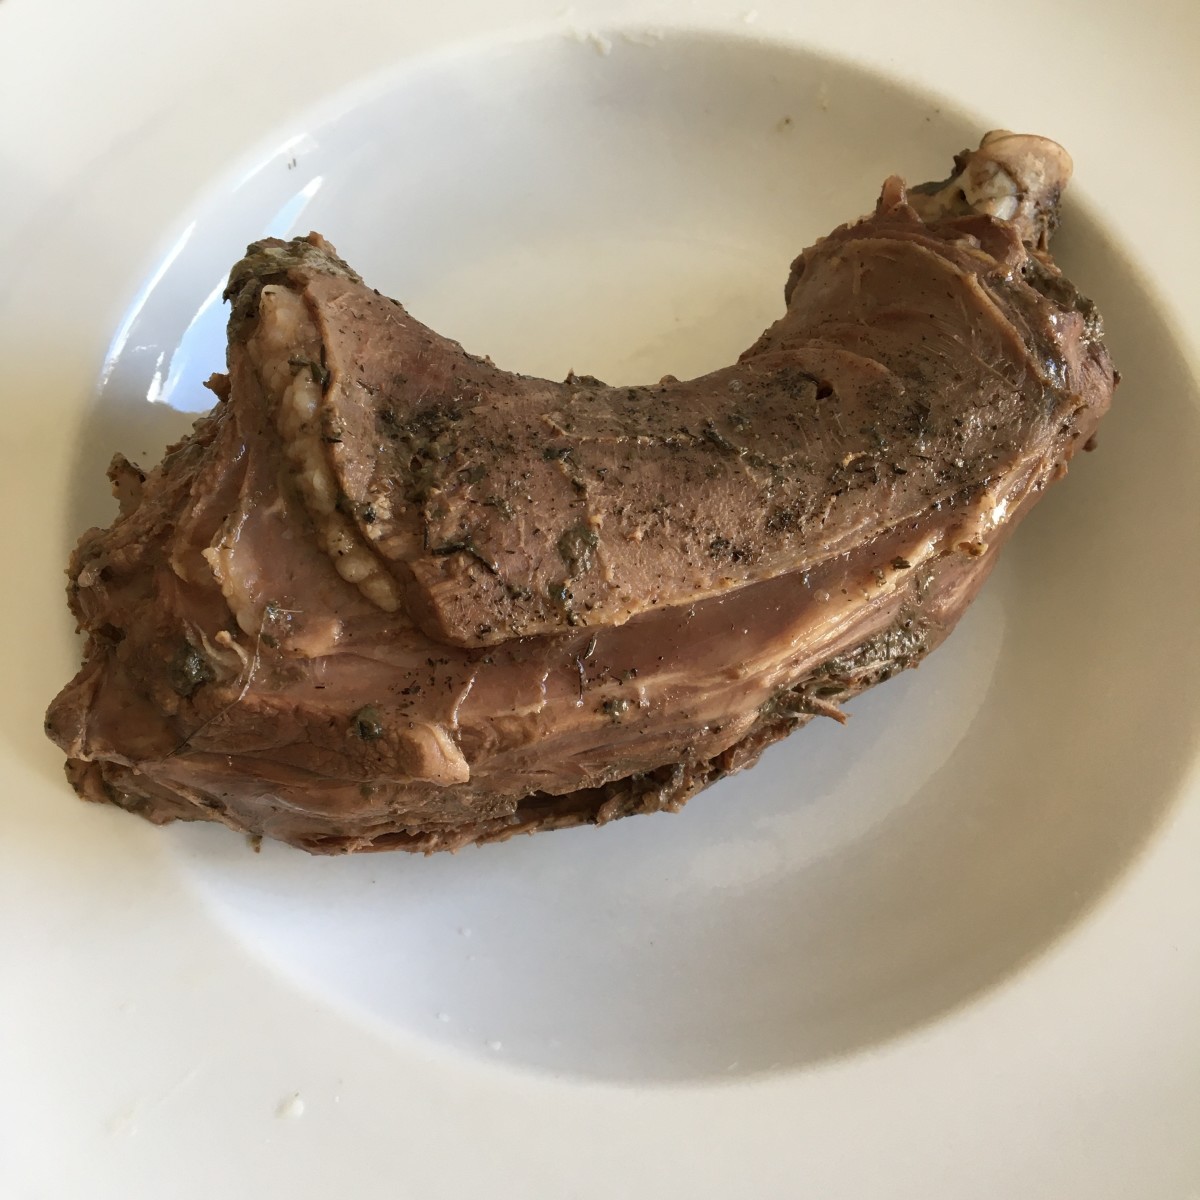 How to Cook Roe Deer Venison Neck in a Crockpot/Slow Cooker